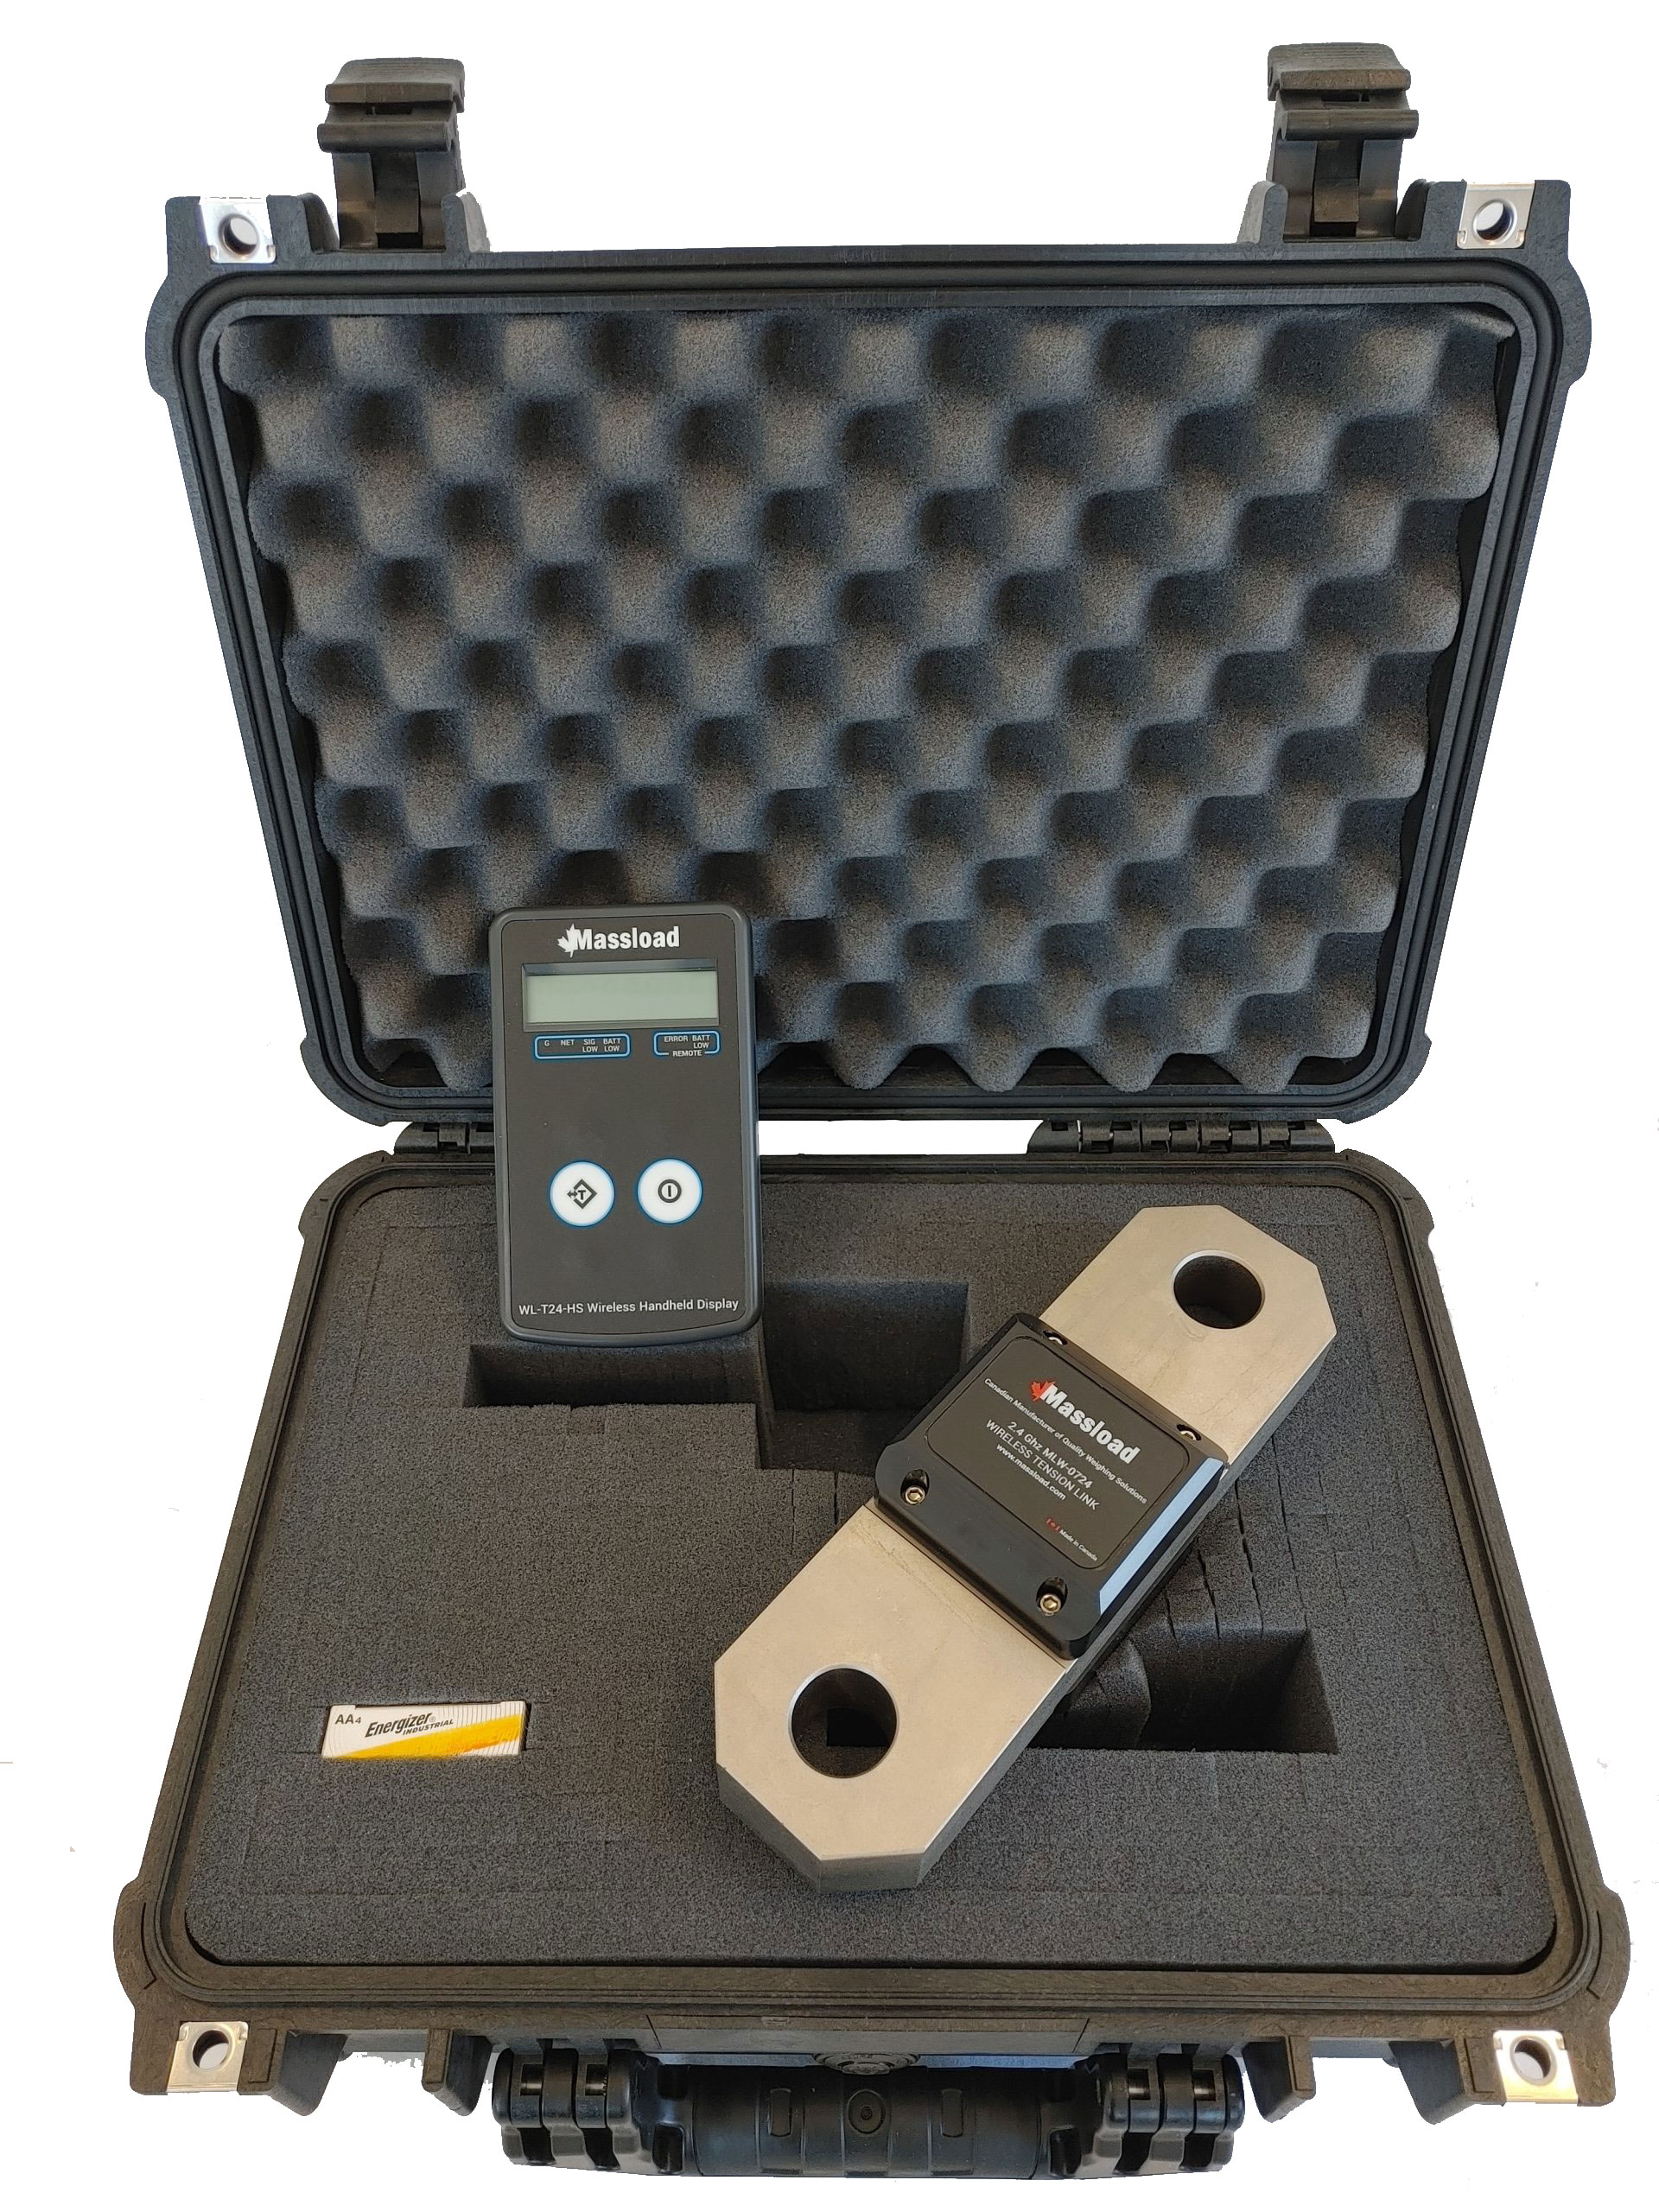 2.4Ghz Wireless Tension Link Safe Lifting Kit by Massload Technologies